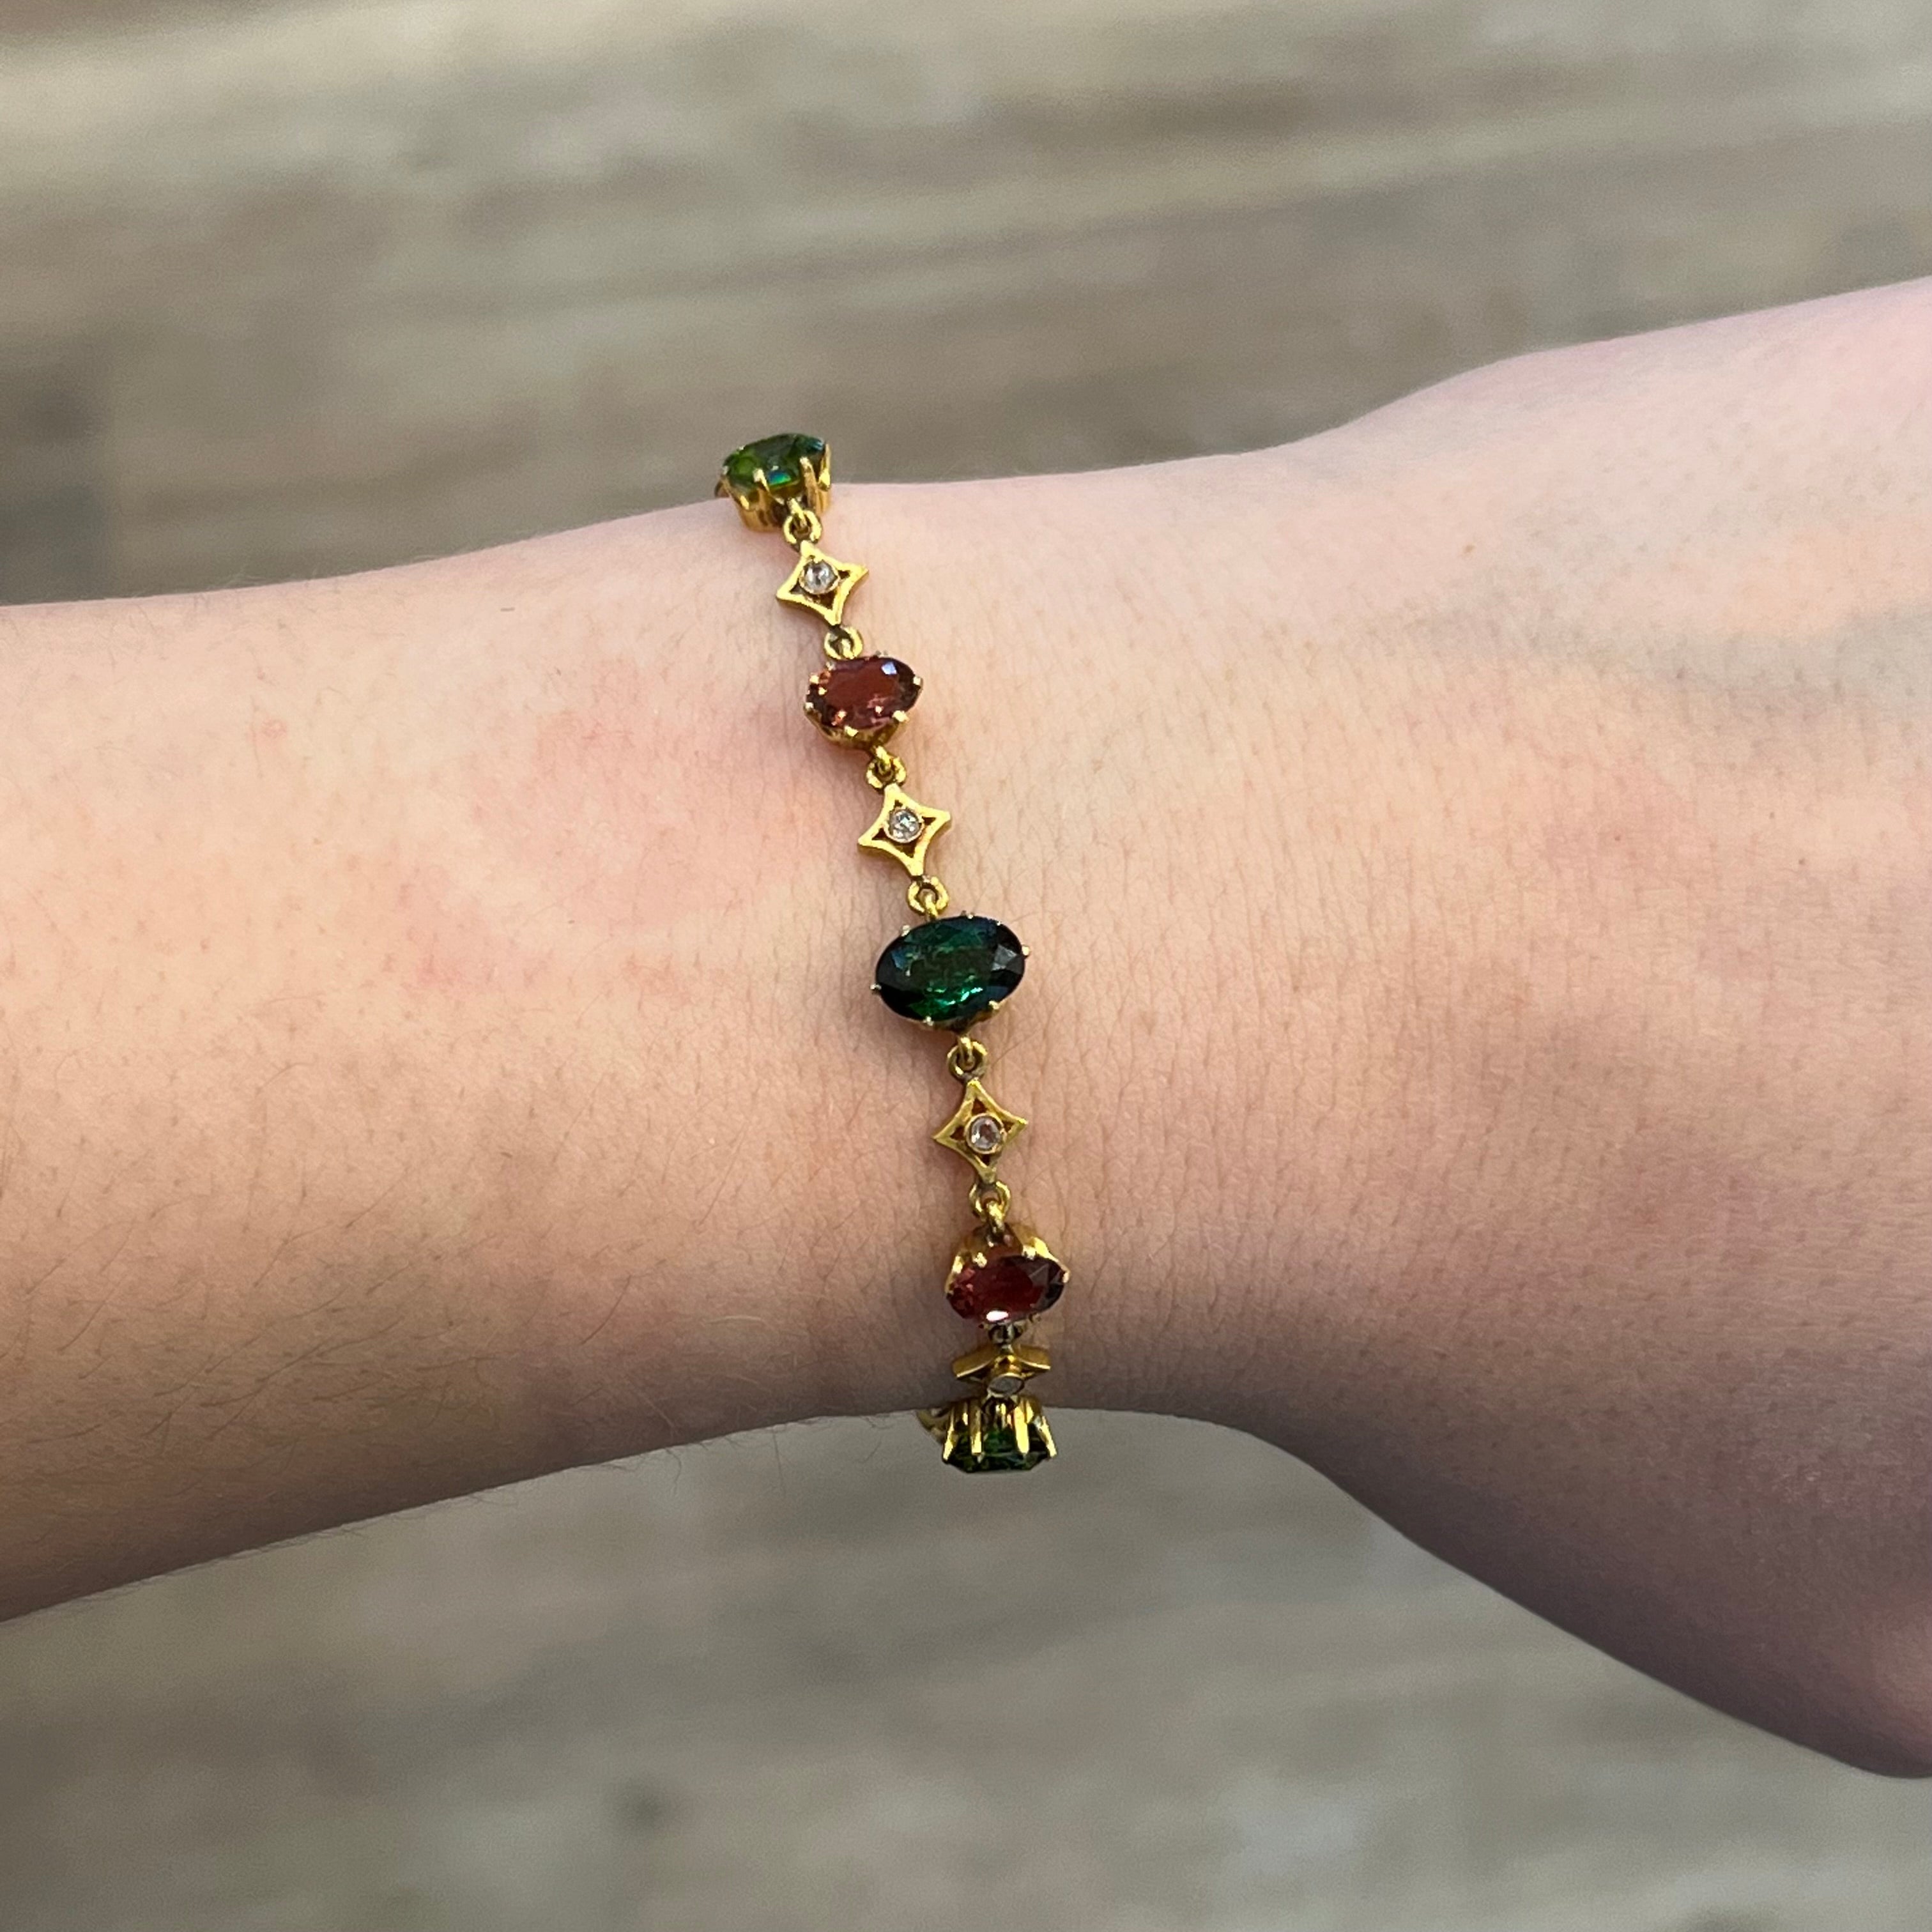 Sapphire Bracelet With Red Garnet, Pink Tourmaline and Gold Hematite,  Delicate Multicolor Bracelet, Woman Dainty Jewelry With Gold Vermeil - Etsy  | Delicate bracelets, Sapphire bracelet, Multicolor bracelet